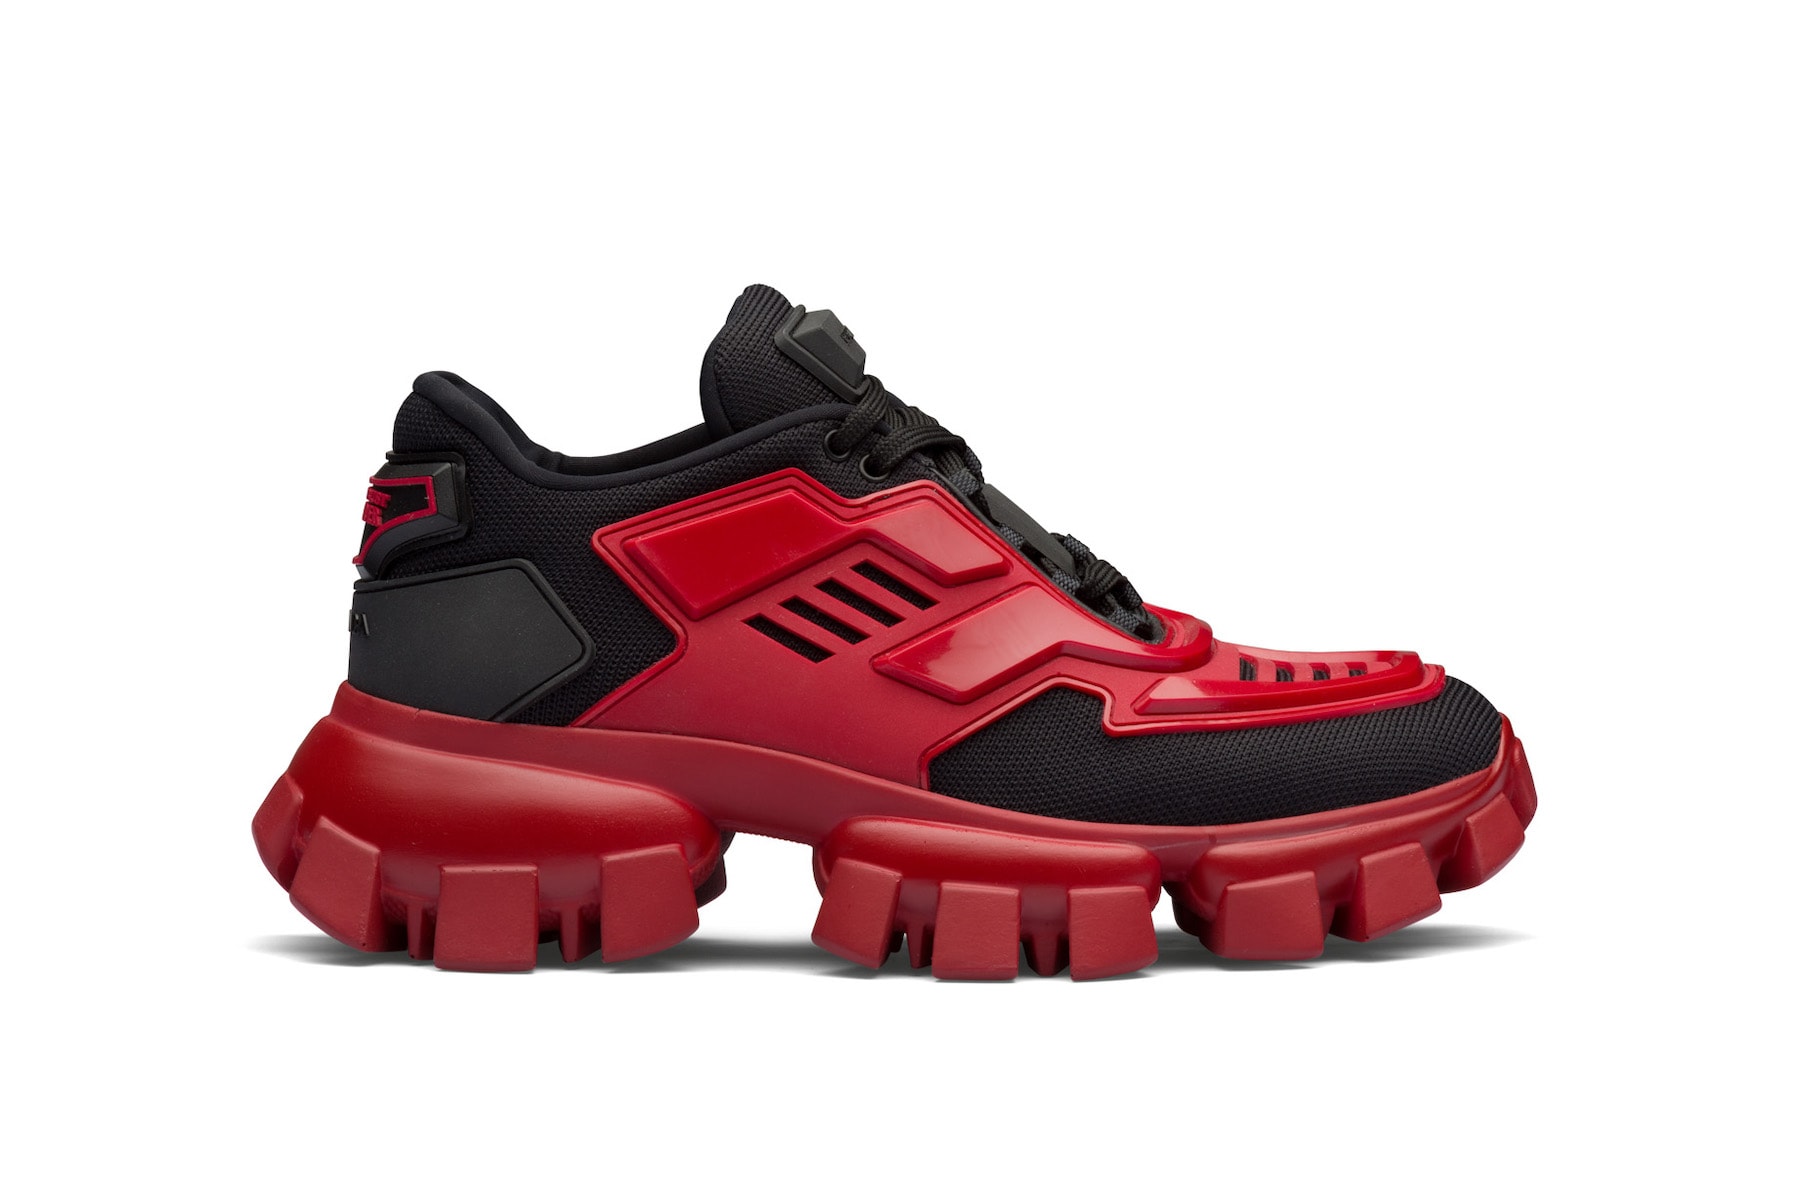 Prada Cloudbust Thunder Chunky Sneaker Release Yellow Red Black White Dad Shoe Fall Winter Trainer Luxury Price Drop Date 